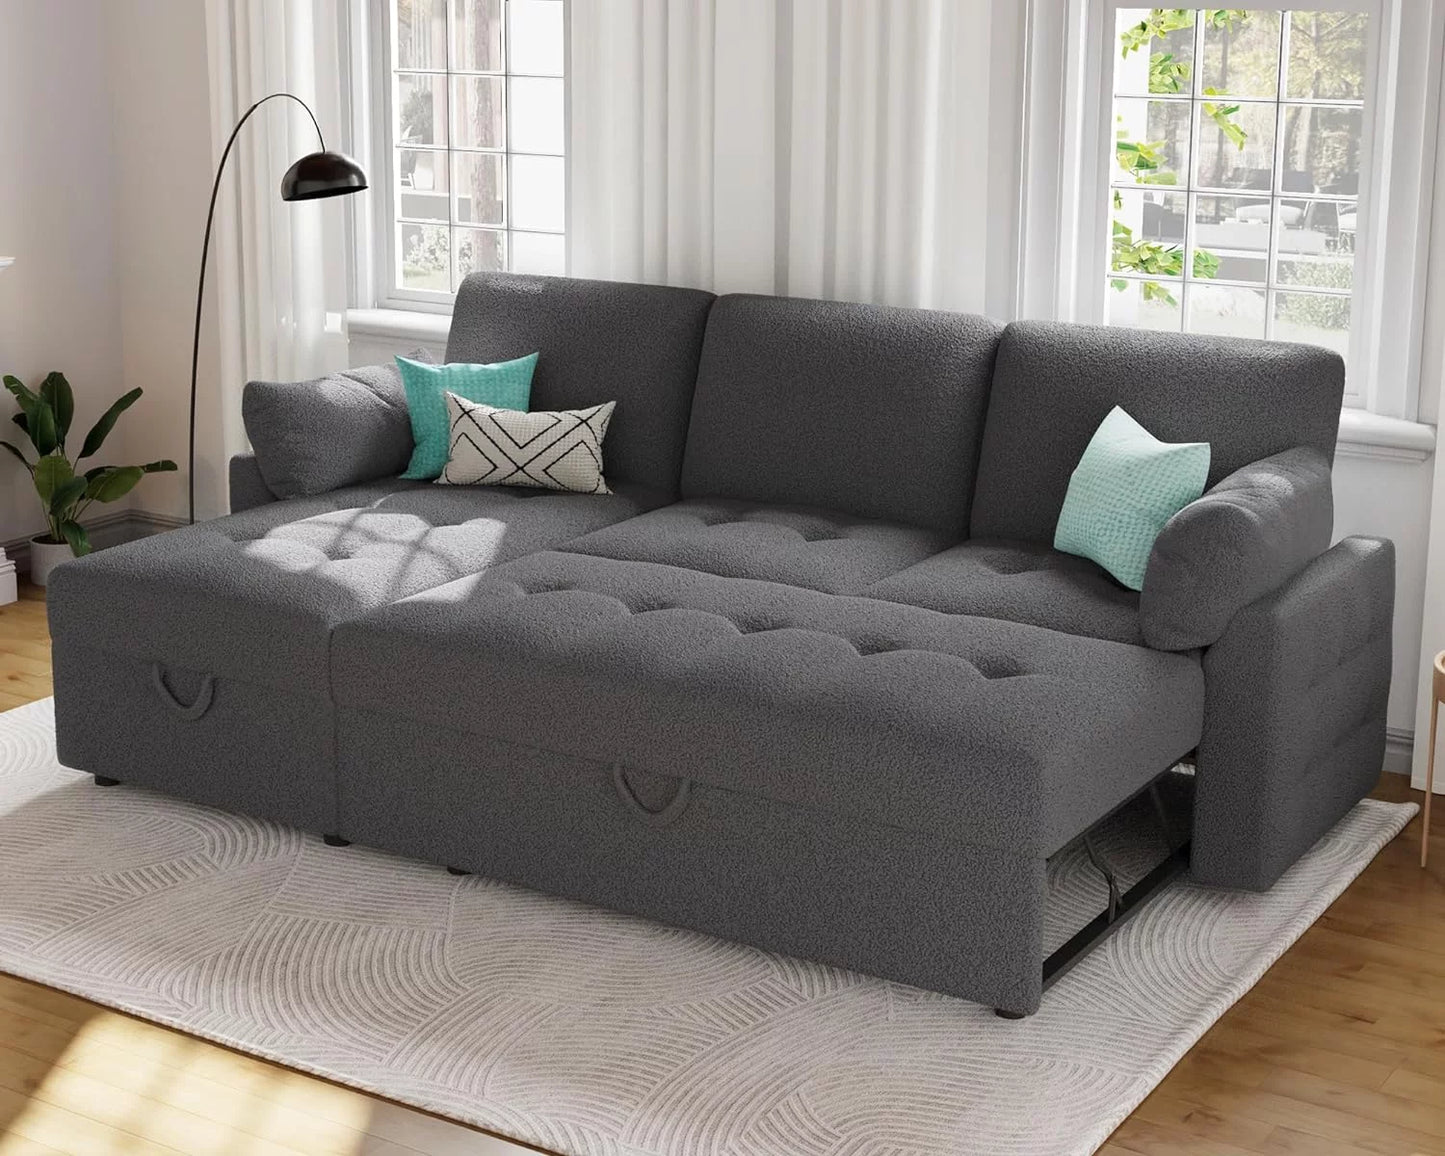 Amerlife 87 Inch Pull Out Sofa Bed, Tufted Sleeper Sofa, L Shaped Couch with Storage Chaise, Chenille Grey